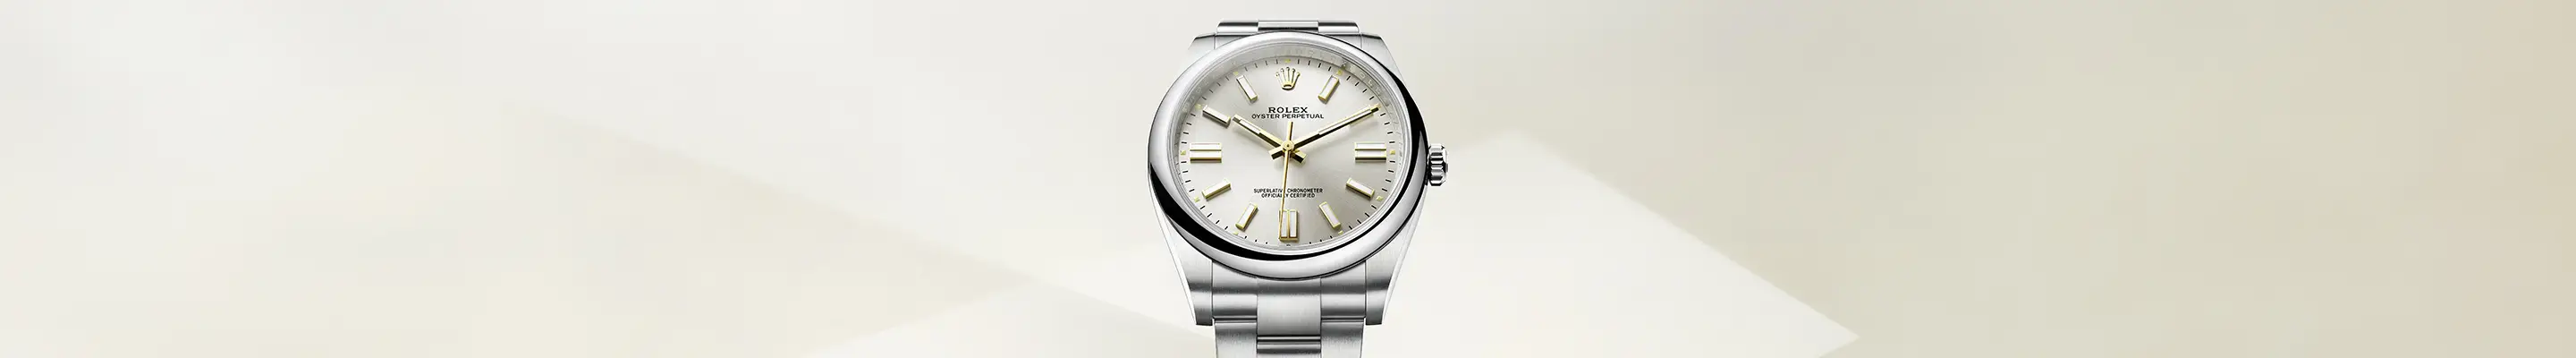 Oyster Perpetual Banner Image